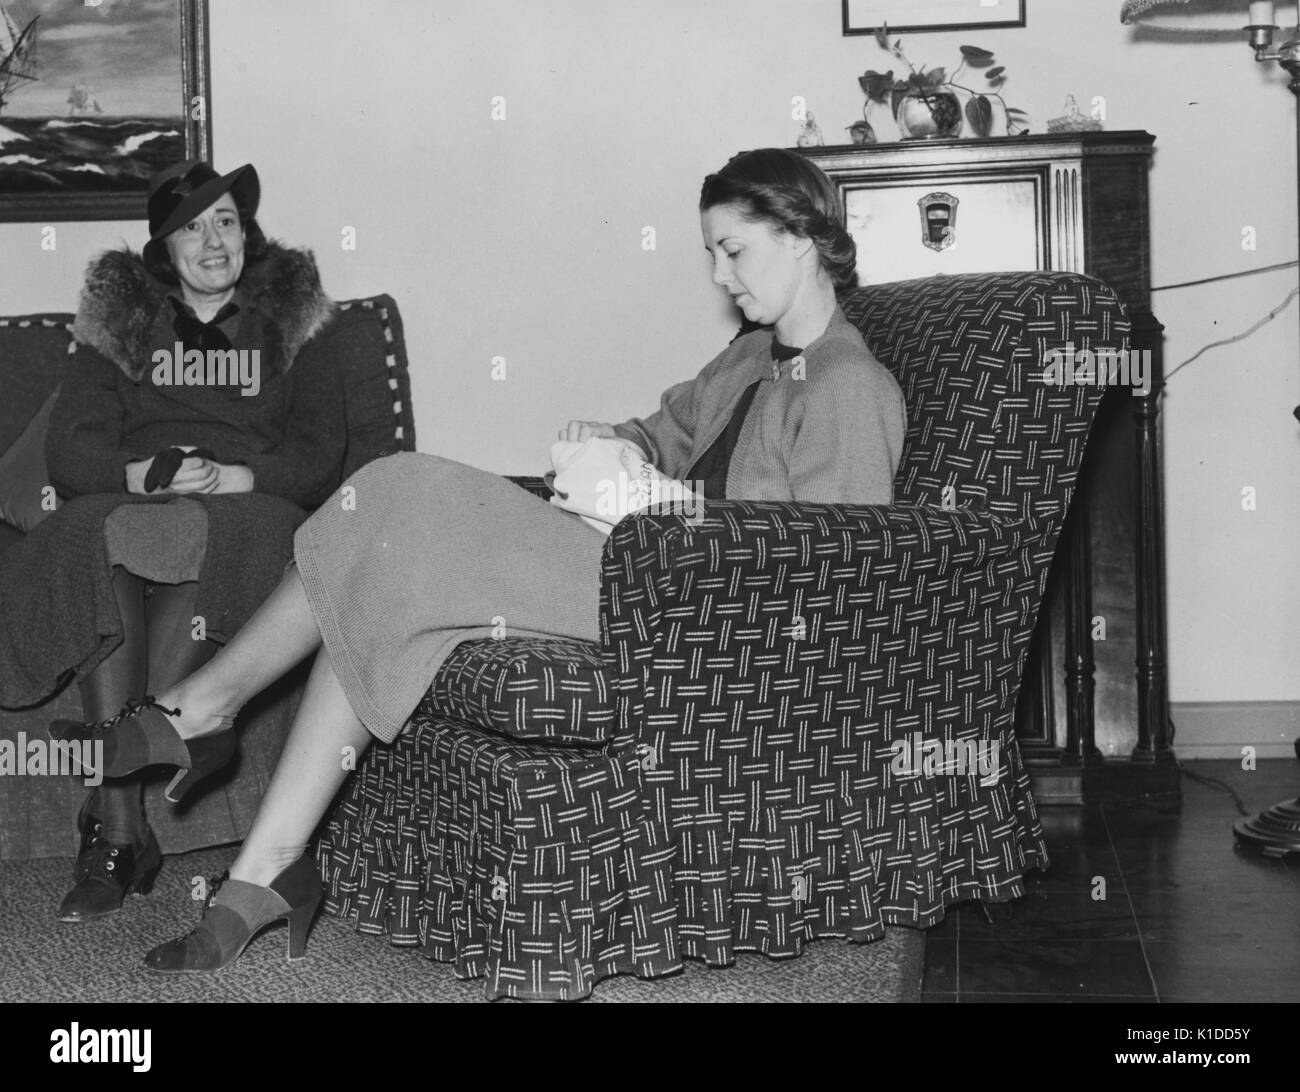 Two female neighbors sitting in chairs in a suburban living room during a social visit, Greenbelt, Maryland, 1937. From the New York Public Library. Stock Photo